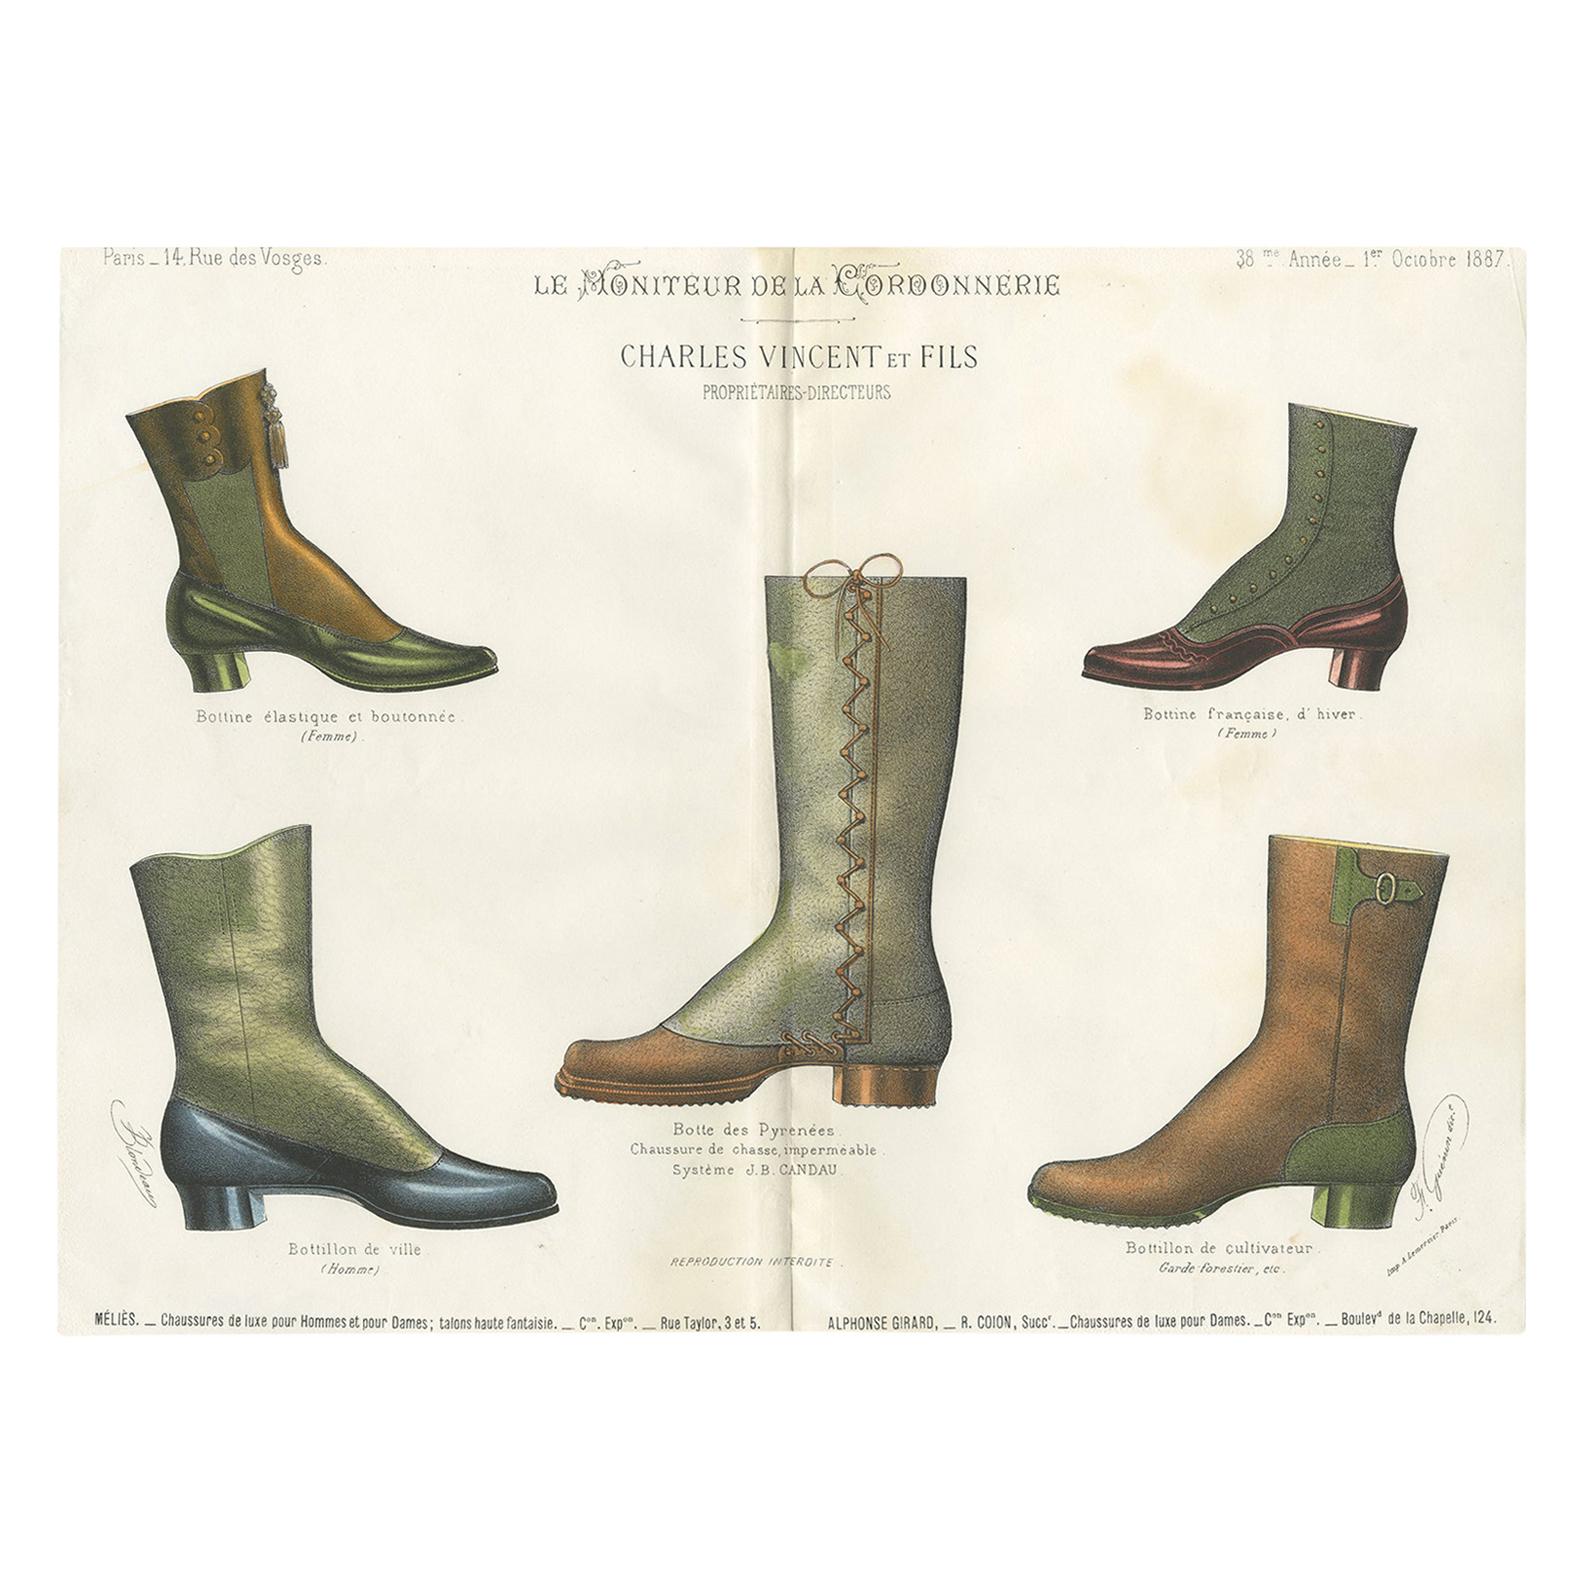 Antique Fashion Print of Shoe Designs Published in October, 1887